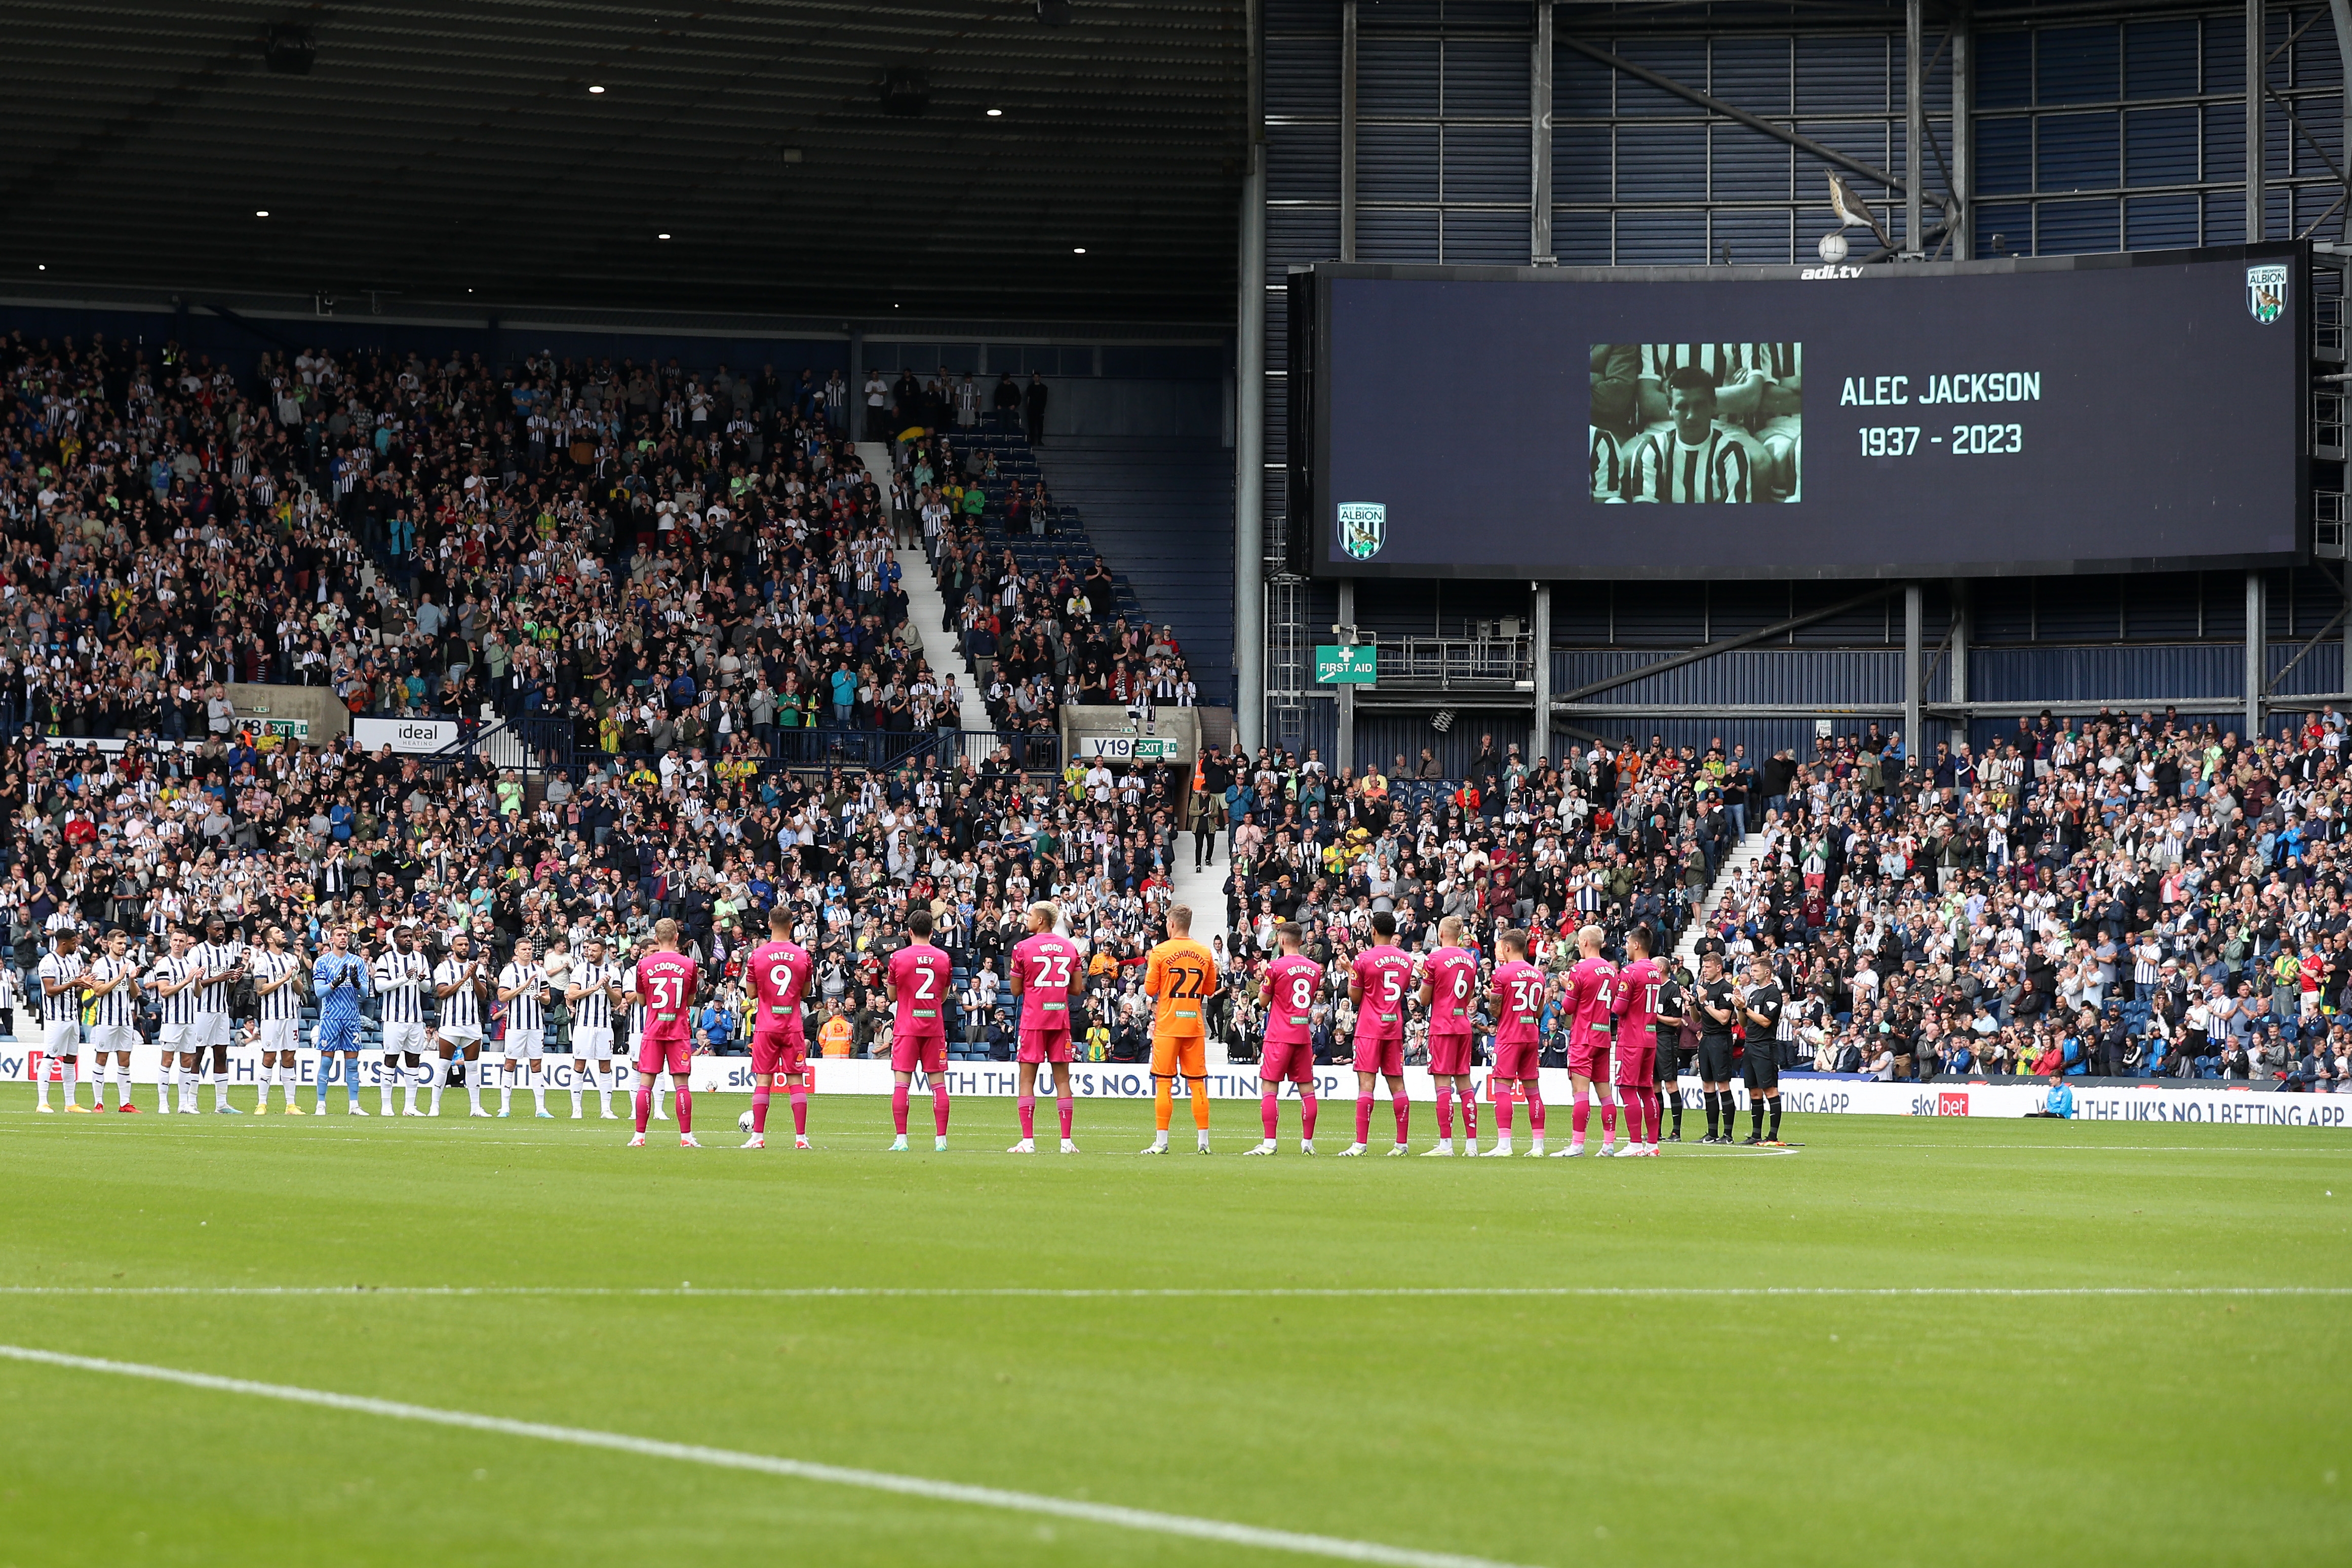 Albion and Swansea players applaud Alec Jackson during a minute's applause at The Hawthorns 